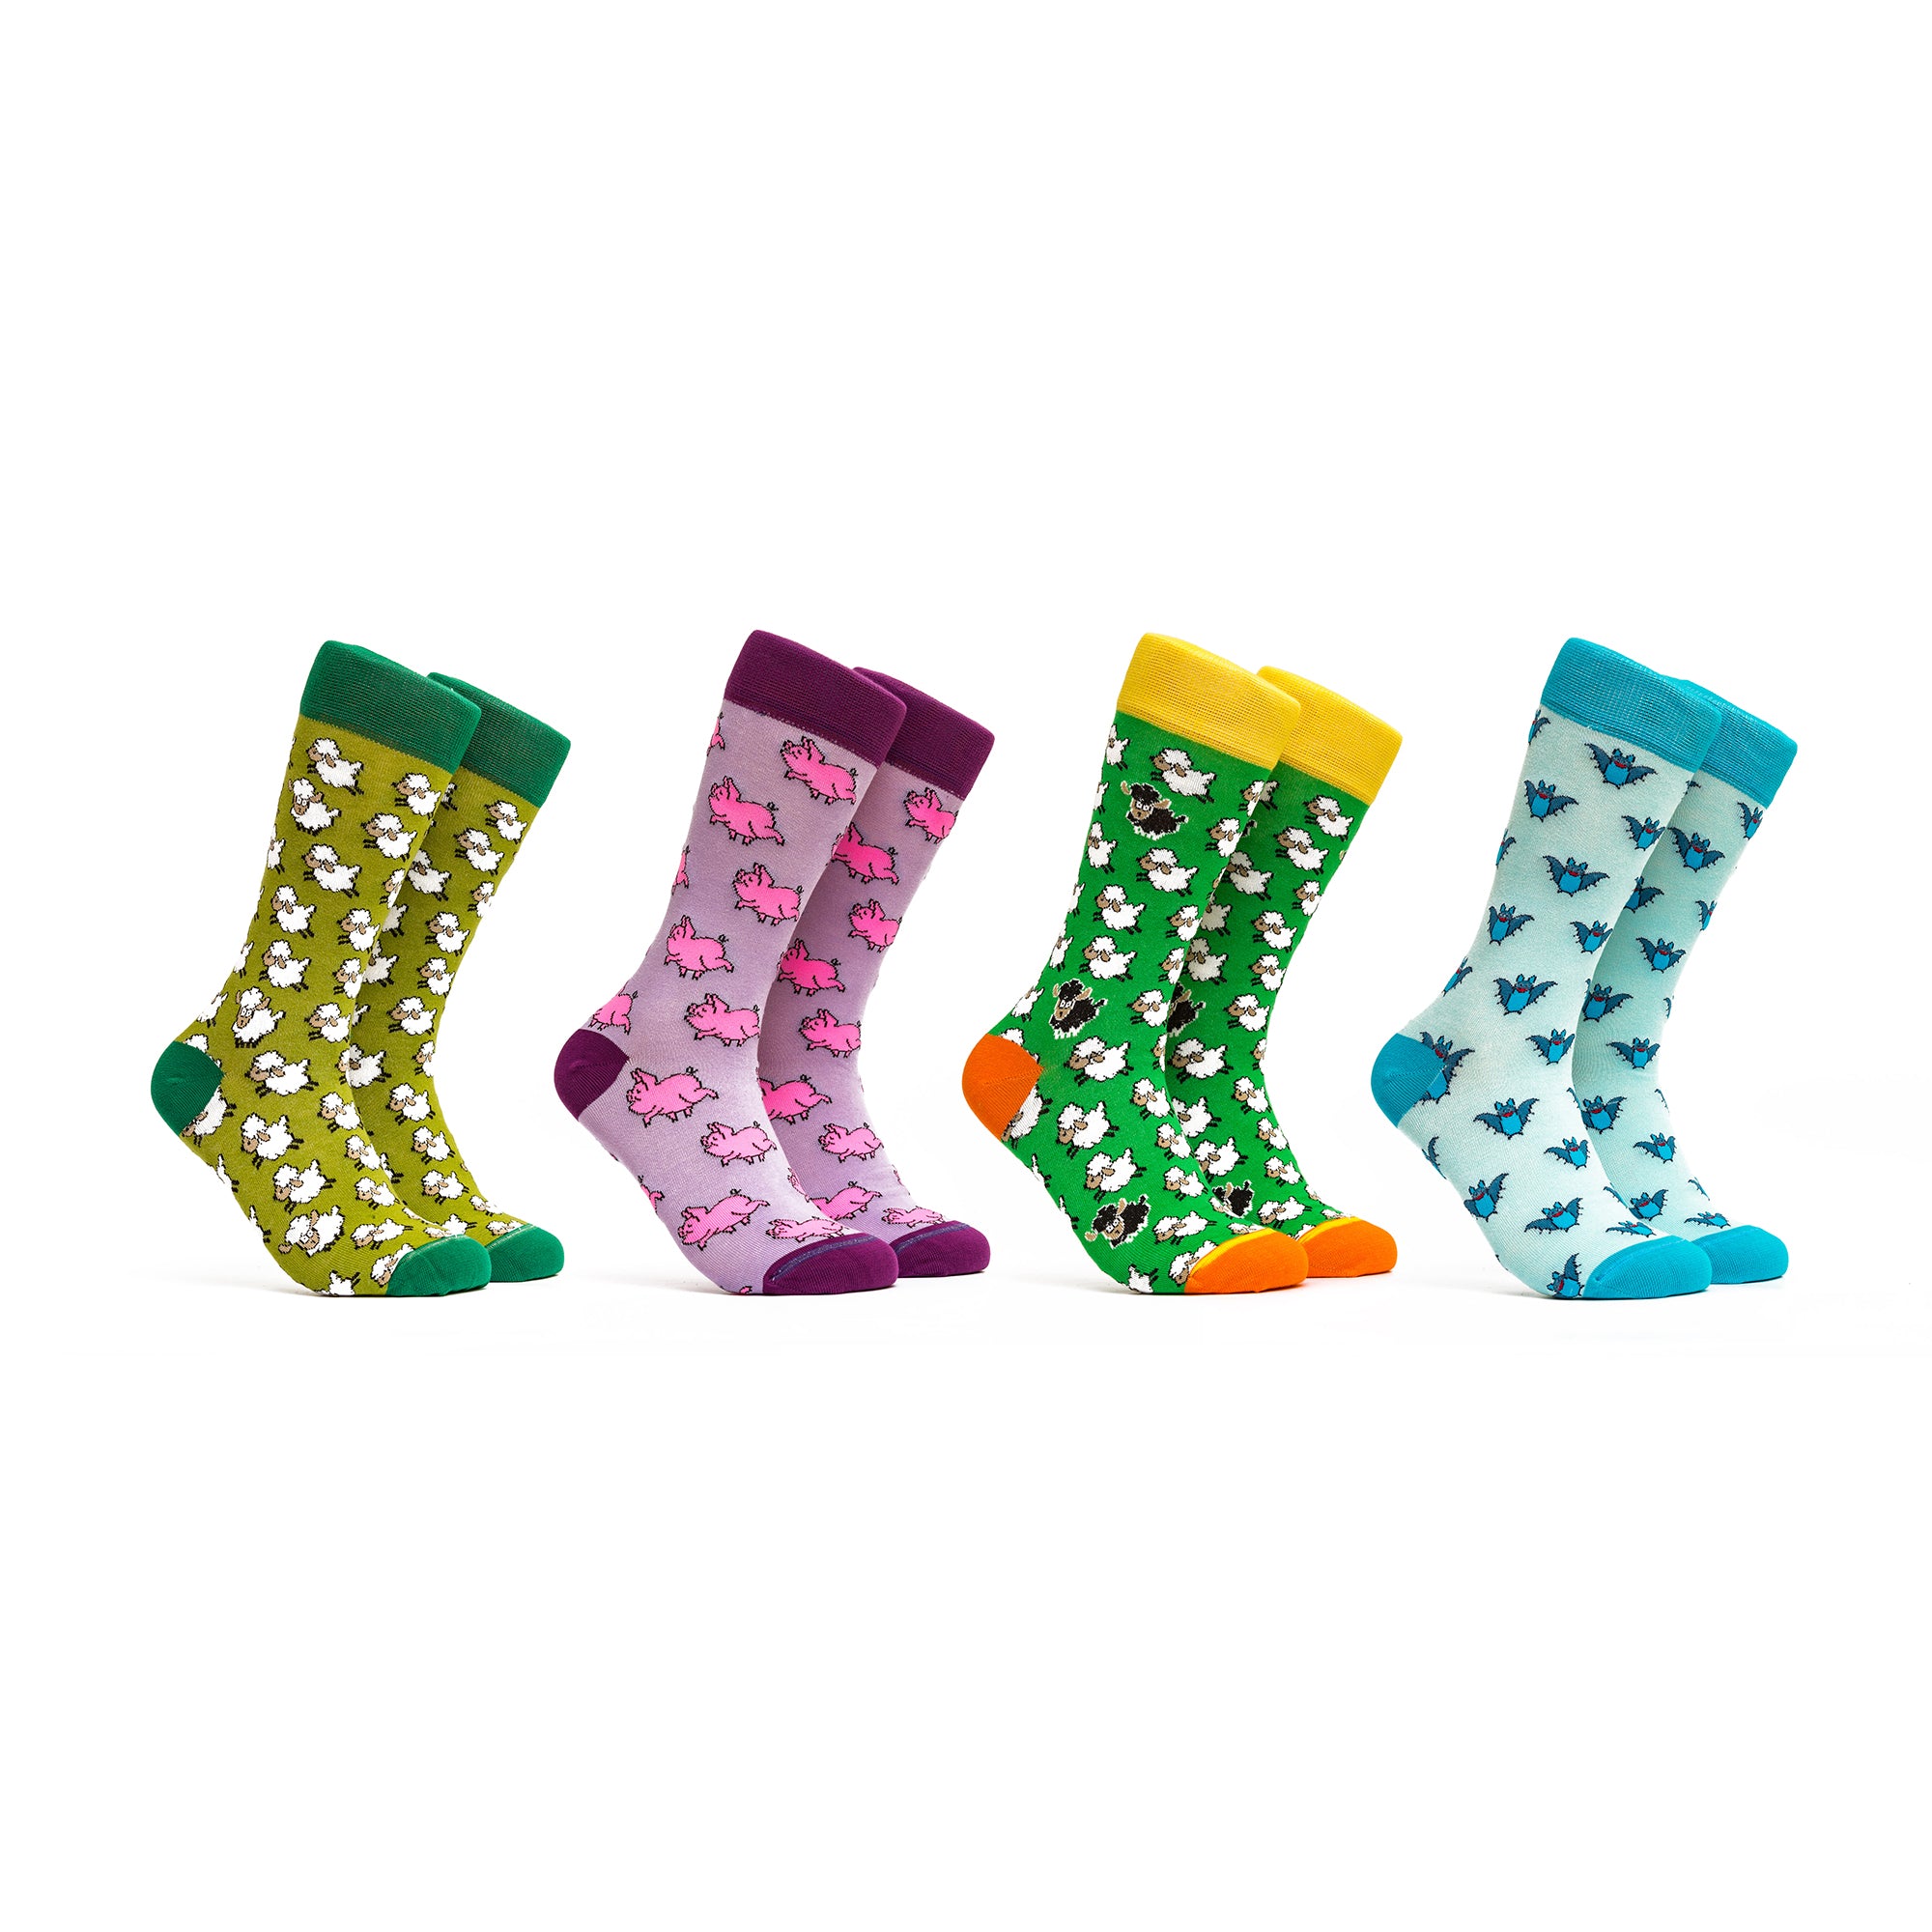 Funny Animals Socks - Colors Turquoise, Green and Pink - 4 Pairs